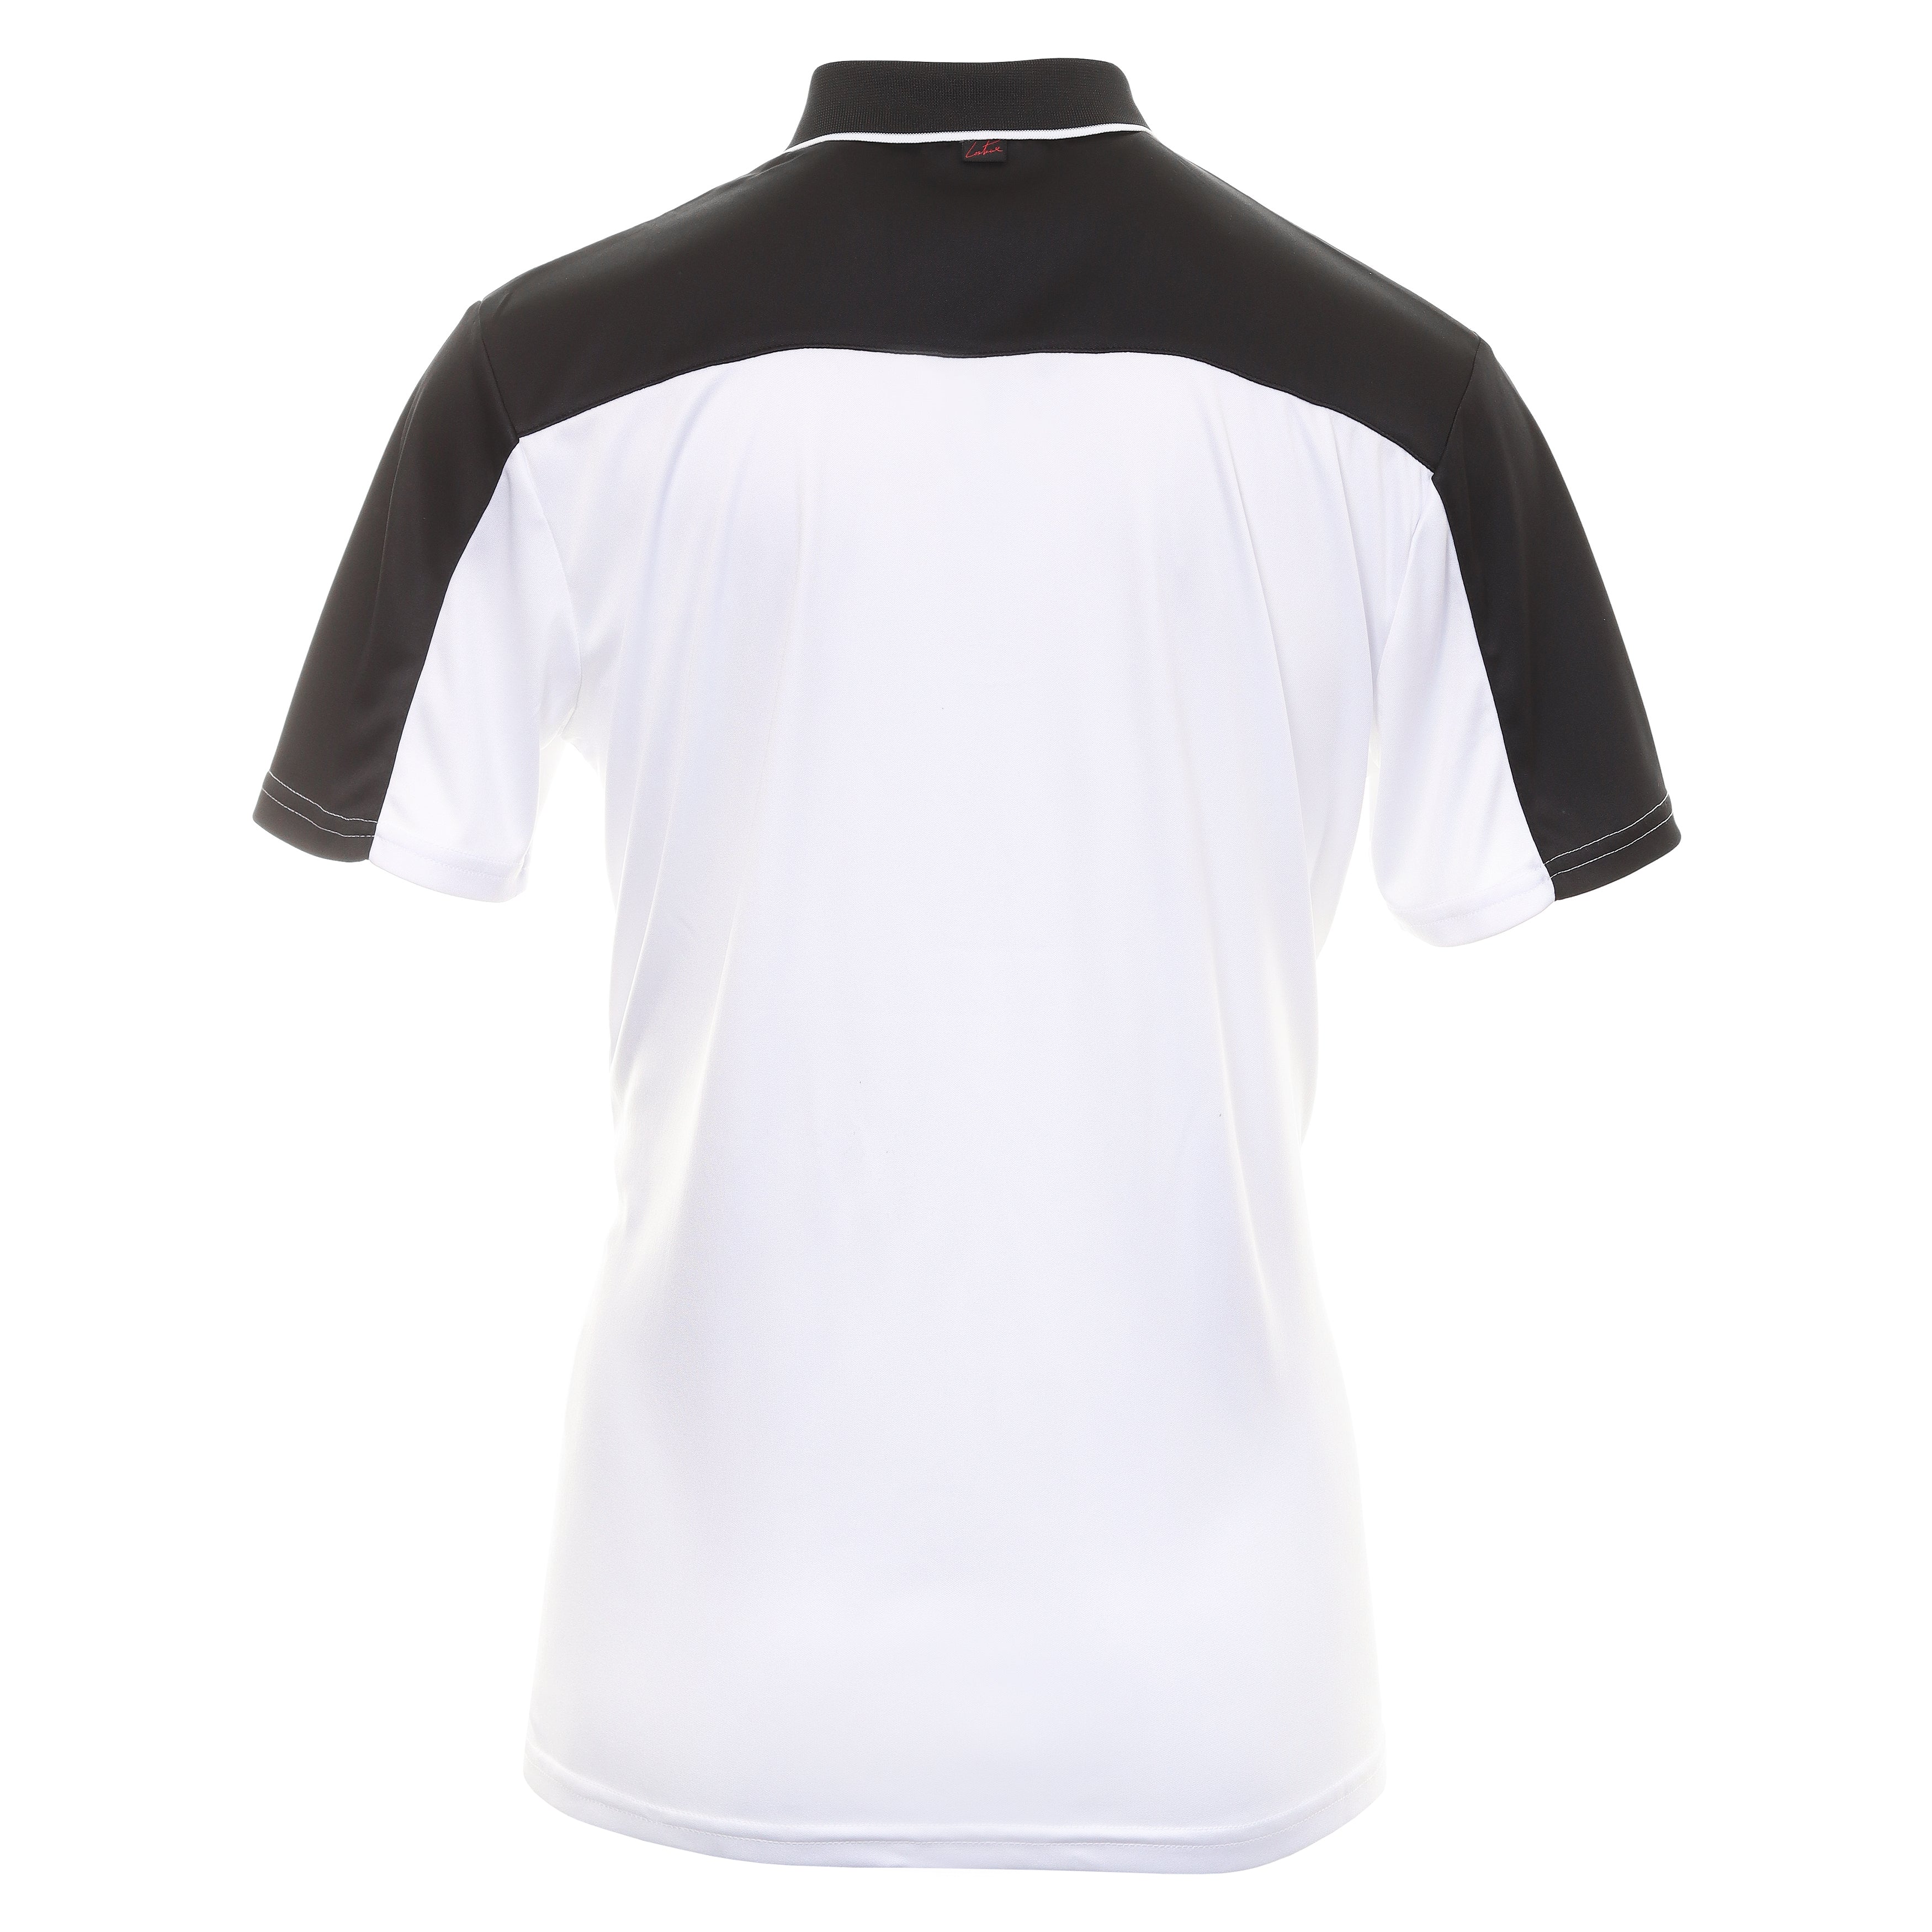 Couture Club Golf Panelled 1/4 Shirt TCCM1977 Black White | Function18 ...